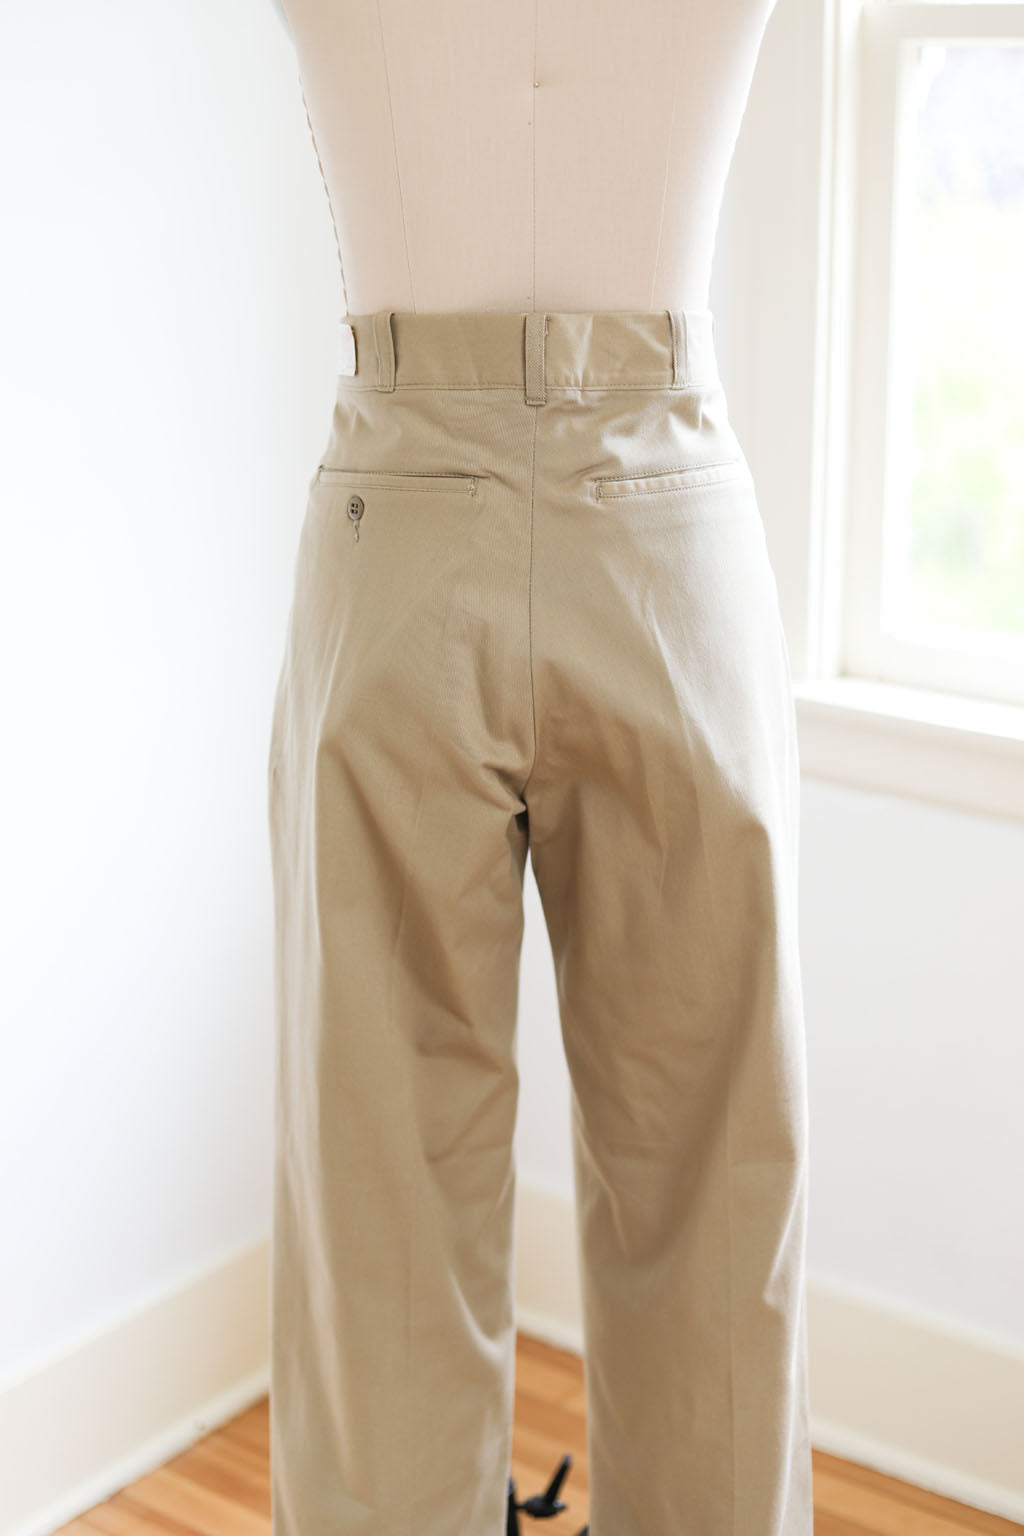 1960s Deadstock Workwear Pants - Cool Vintage 60s US Navy Khaki Cotton Work or Play Jeans Trousers - Choose Your Size 27, 28, 29